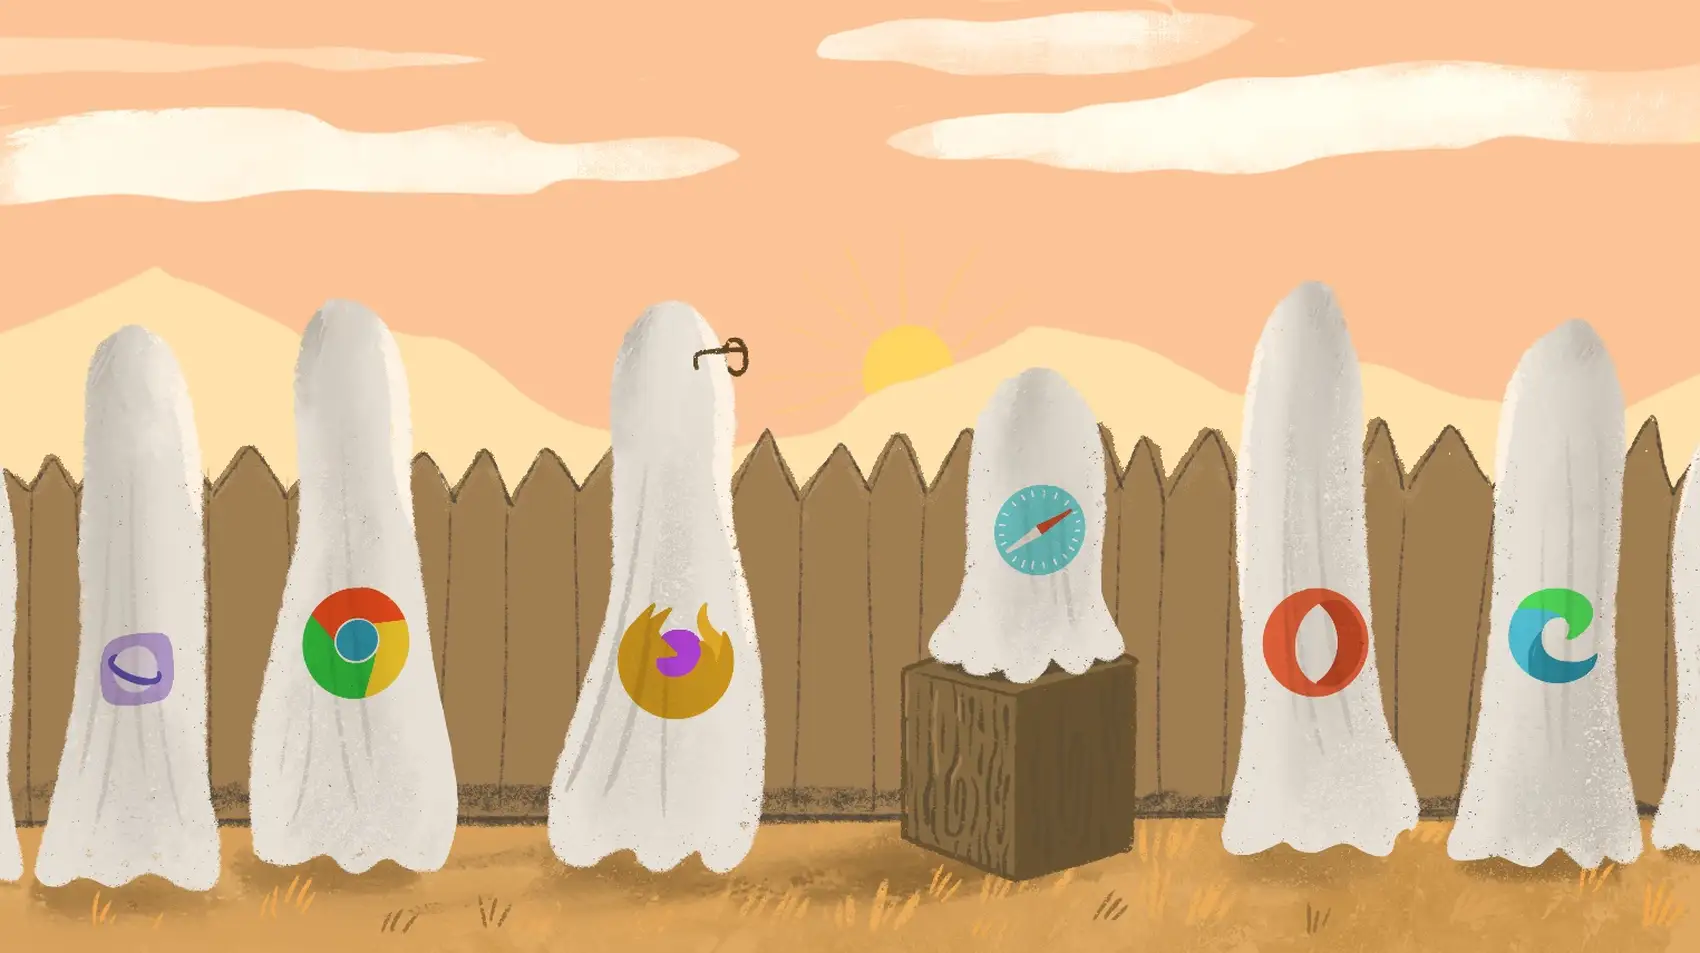 ghostly figures with browser icons looking over a fence.  The Safari ghost is standing on a wooden box enabling it to see over the fence.